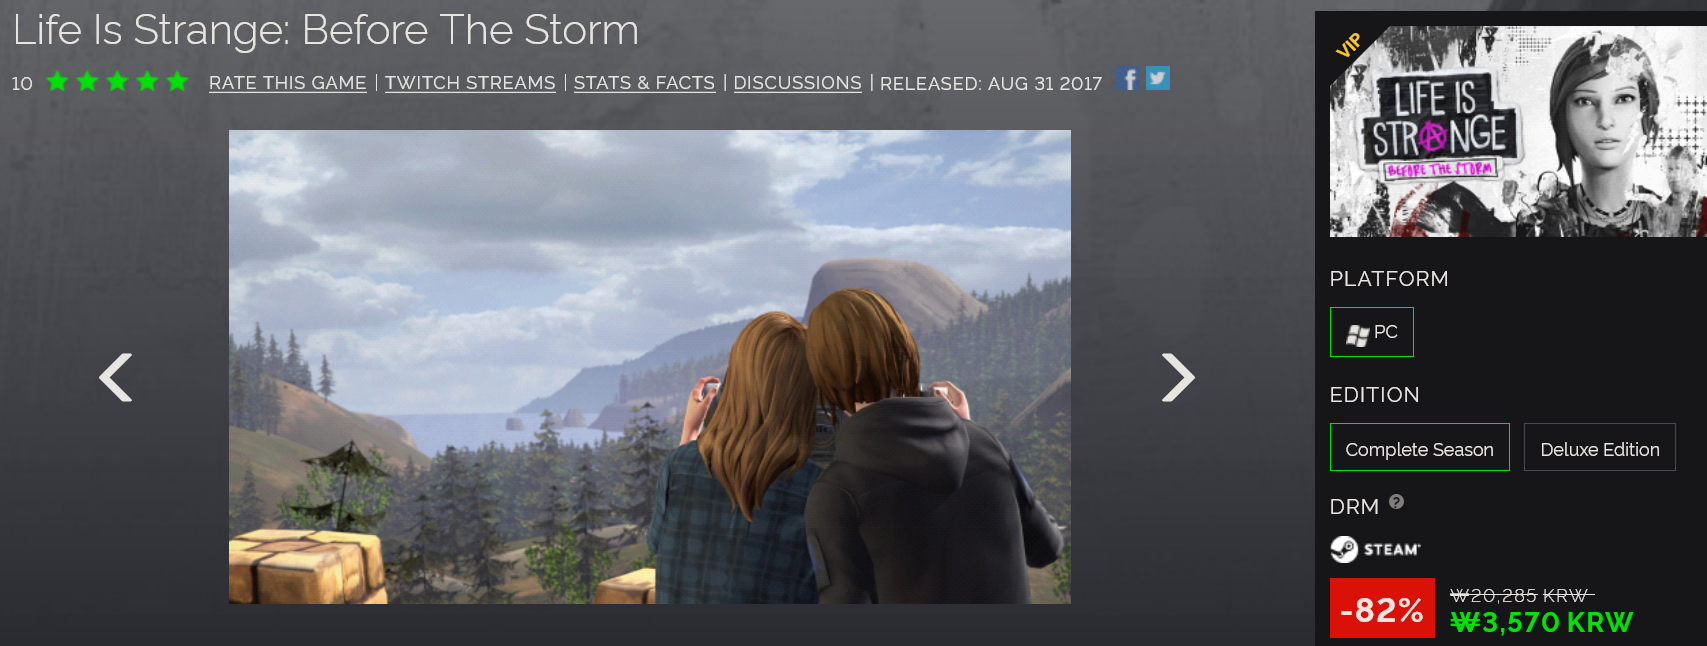 Screenshot_2020-02-11 Life Is Strange Before The Storm PC - Steam Game Keys.png